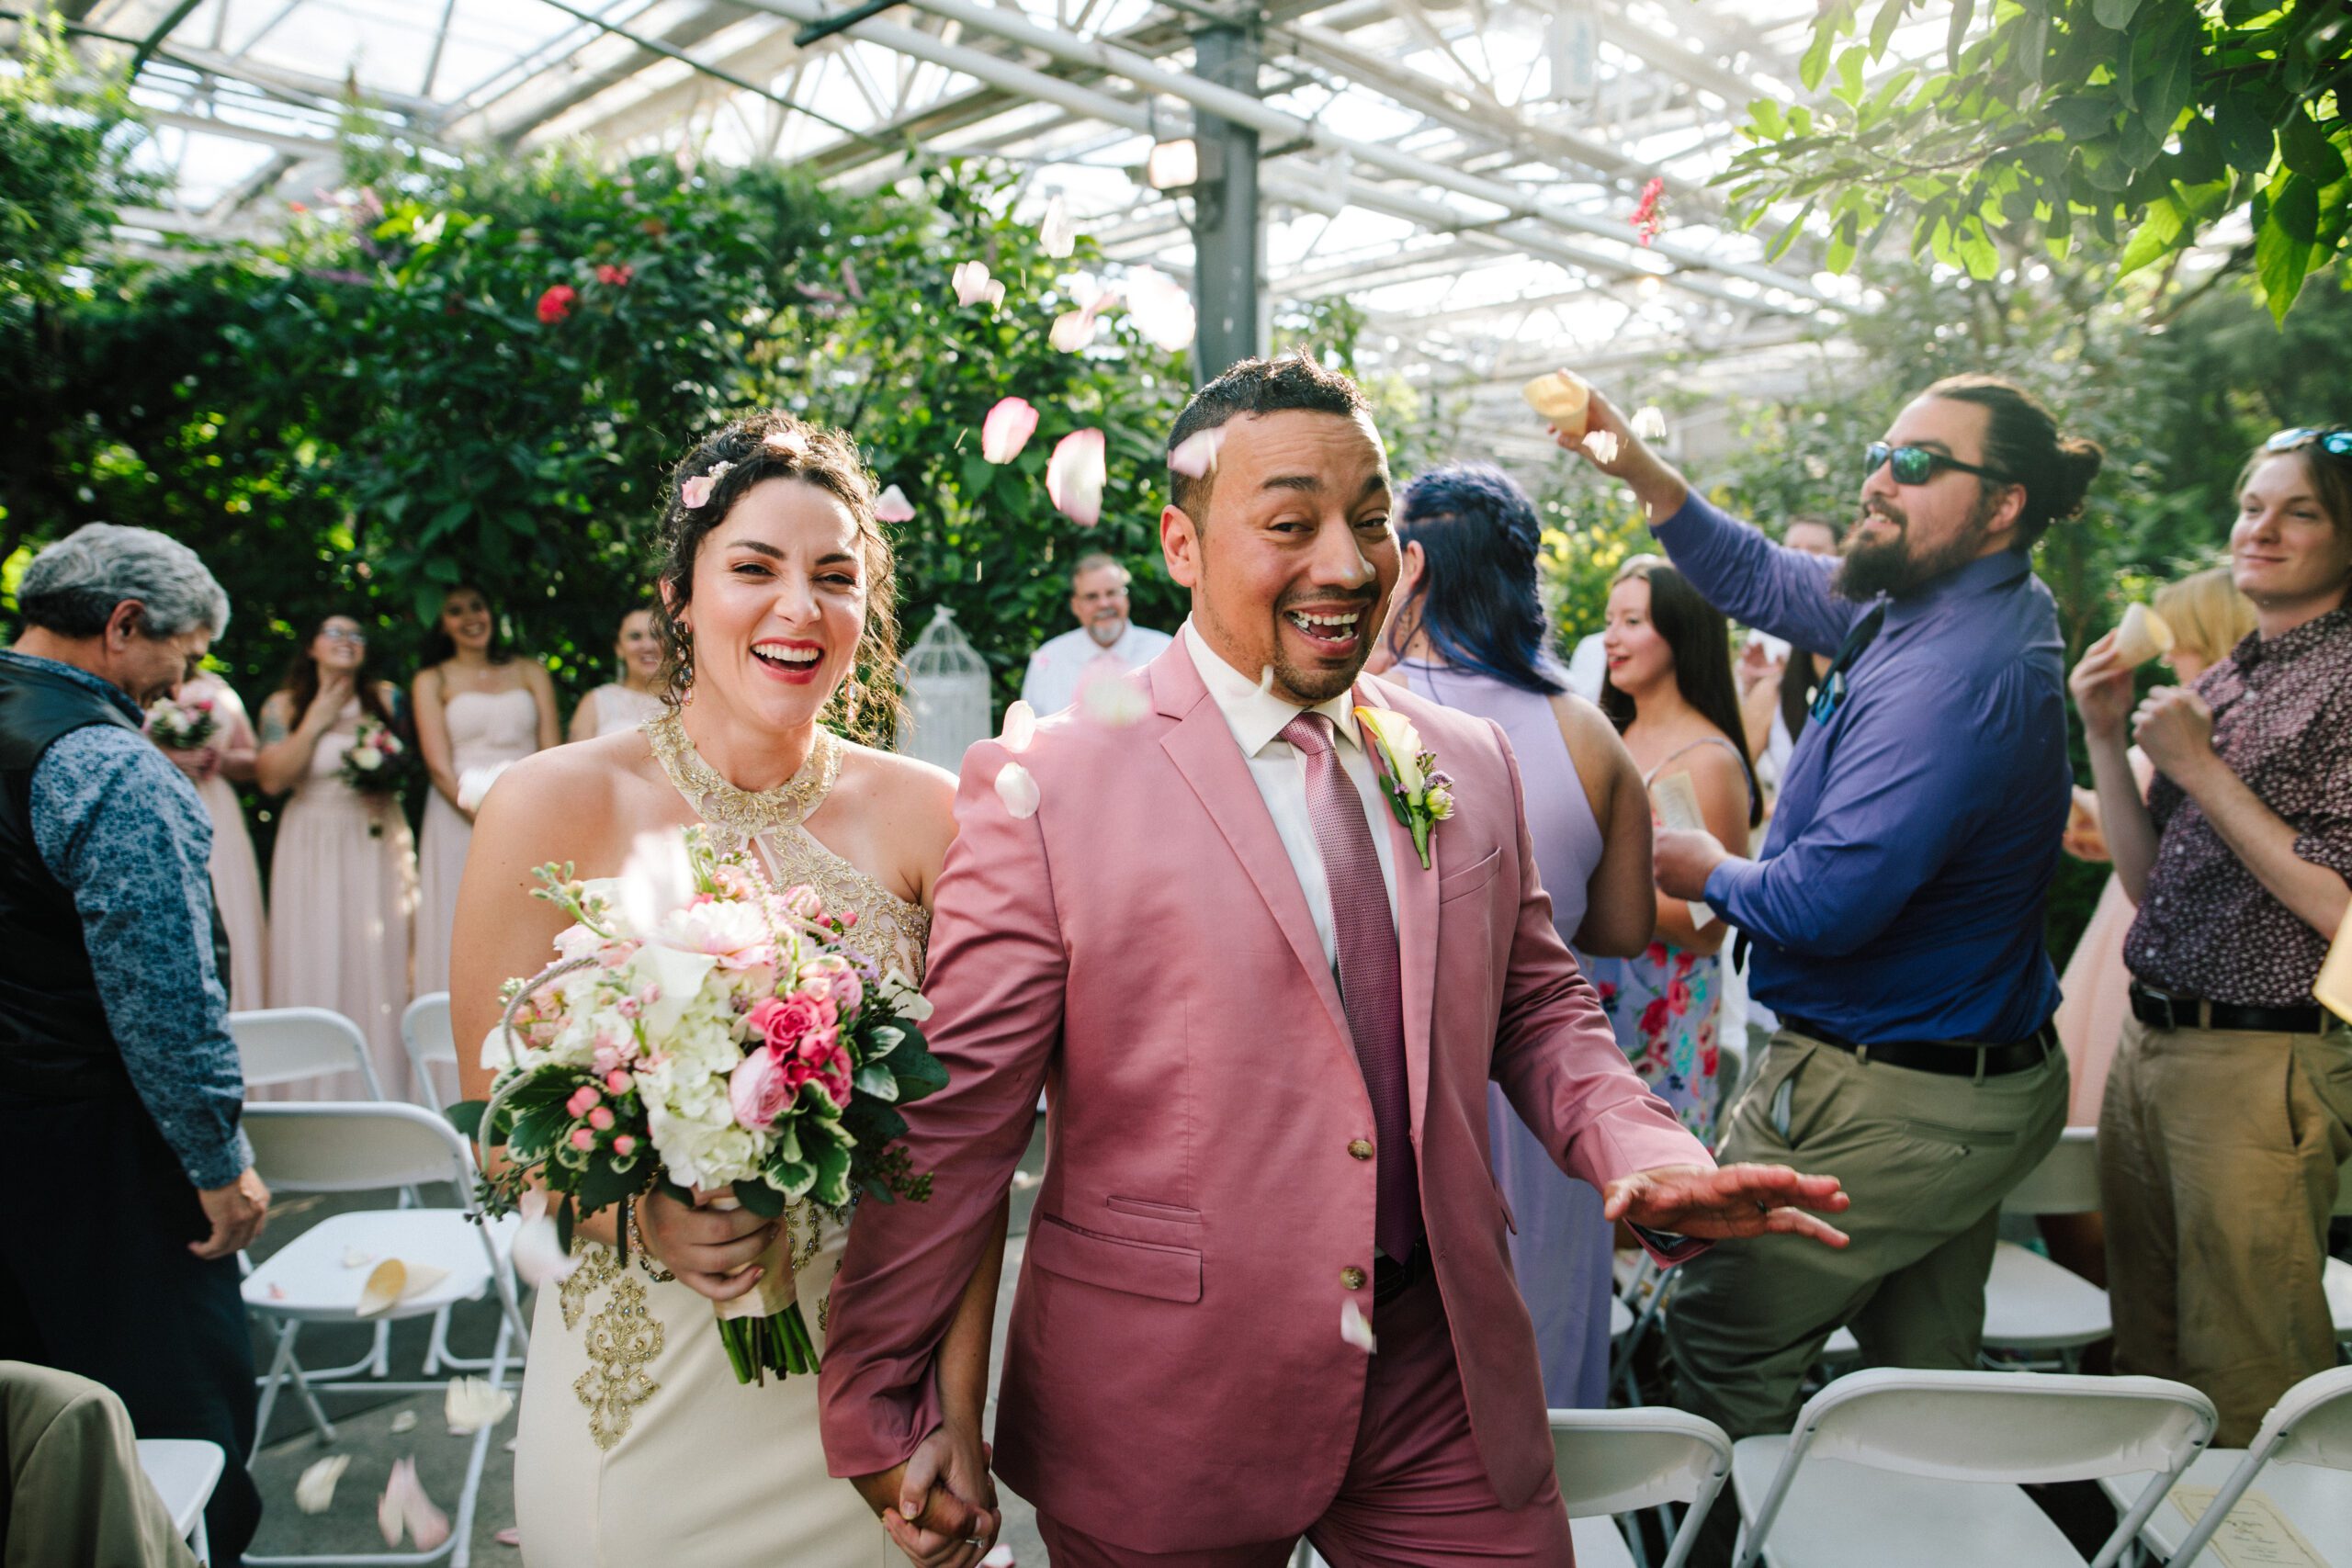 The bride and groom walk down the aisle after their intimate ceremony from their Butterfly Pavilion Wedding. ⁠